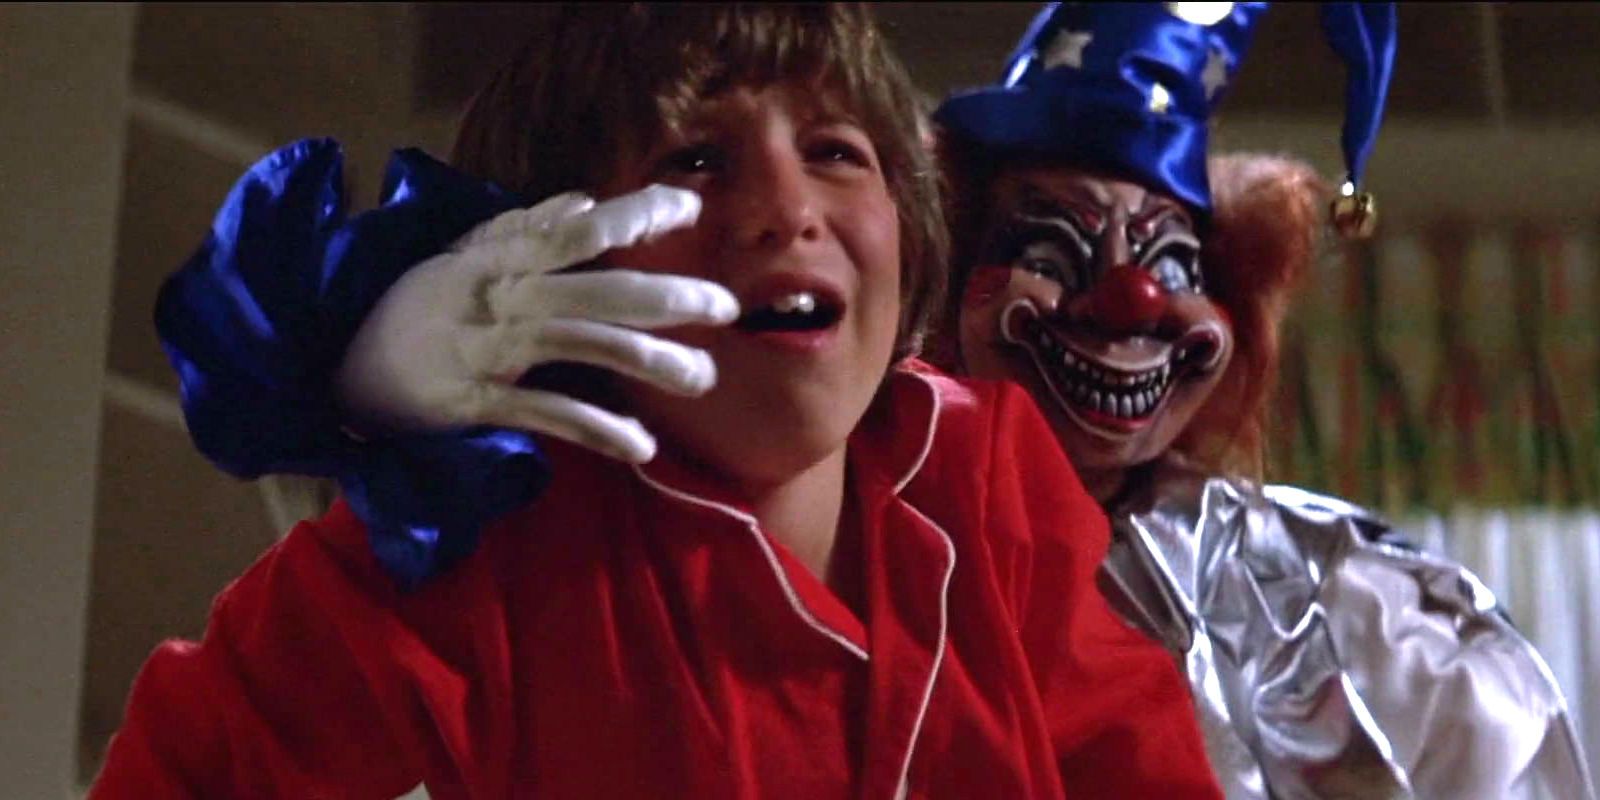 A clown holding the boy from Poltergeist.